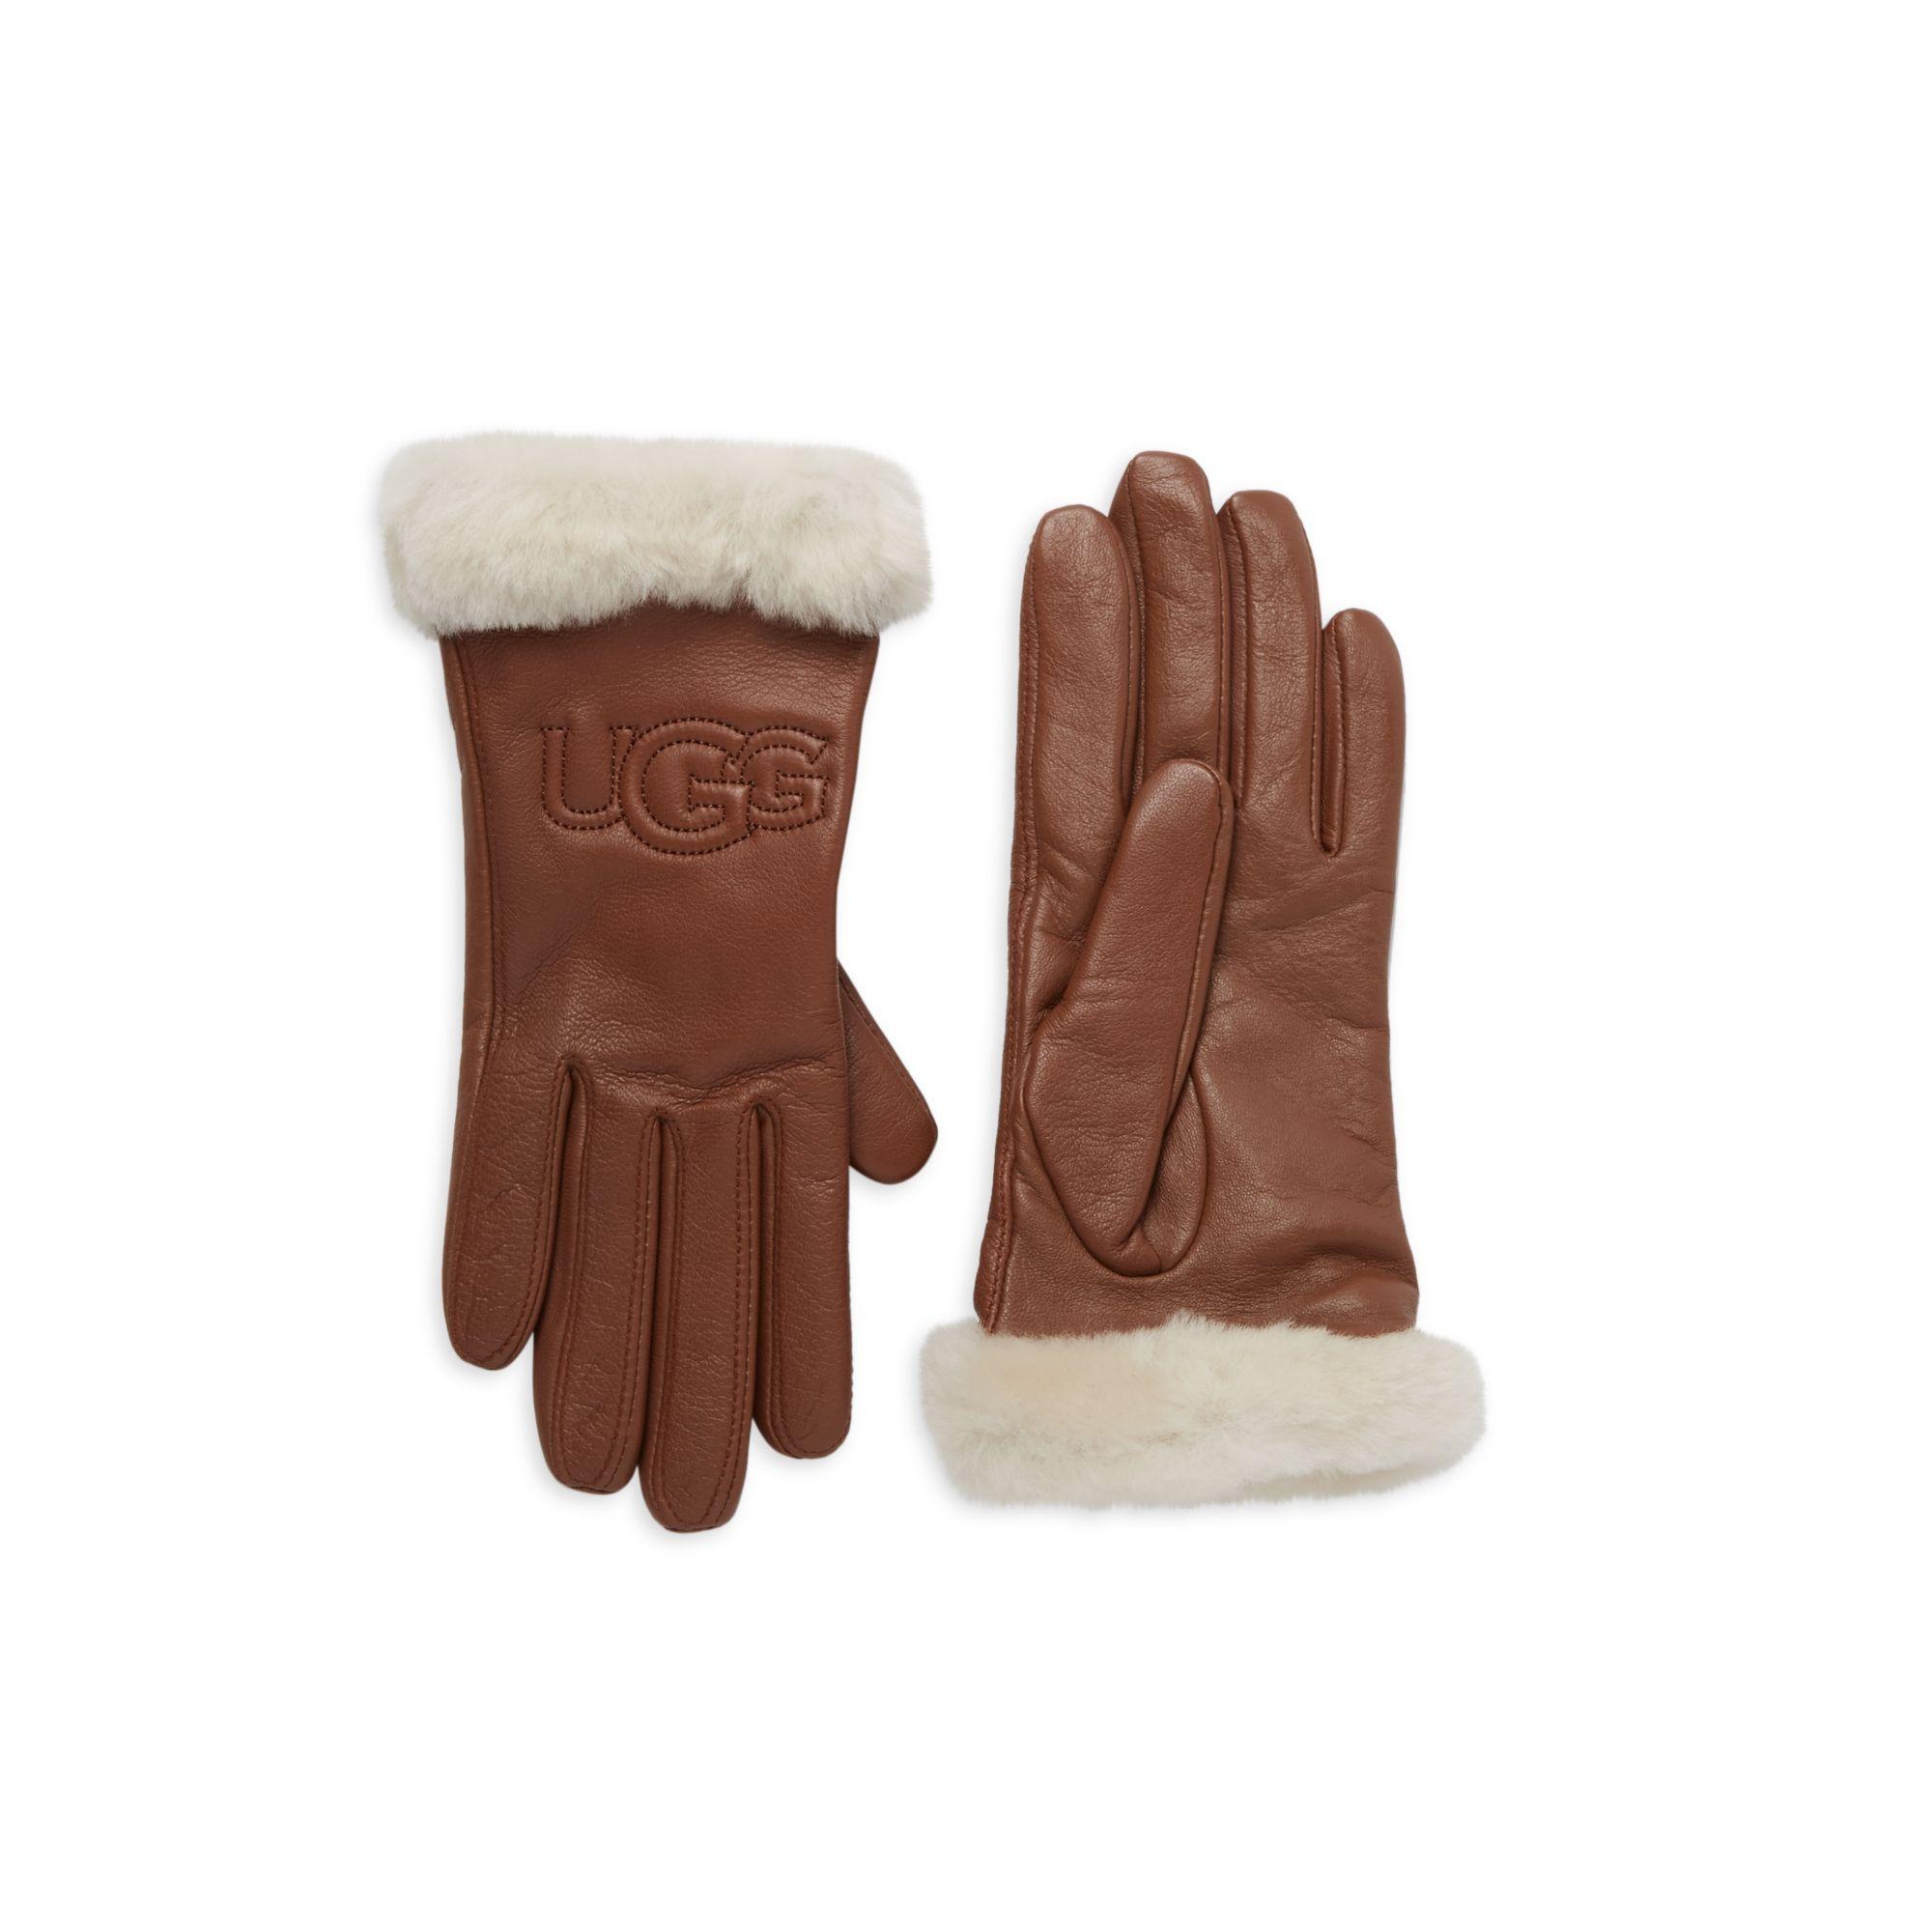 UGG Classic Leather Shorty Tech Gloves in Chestnut (Brown) - Lyst